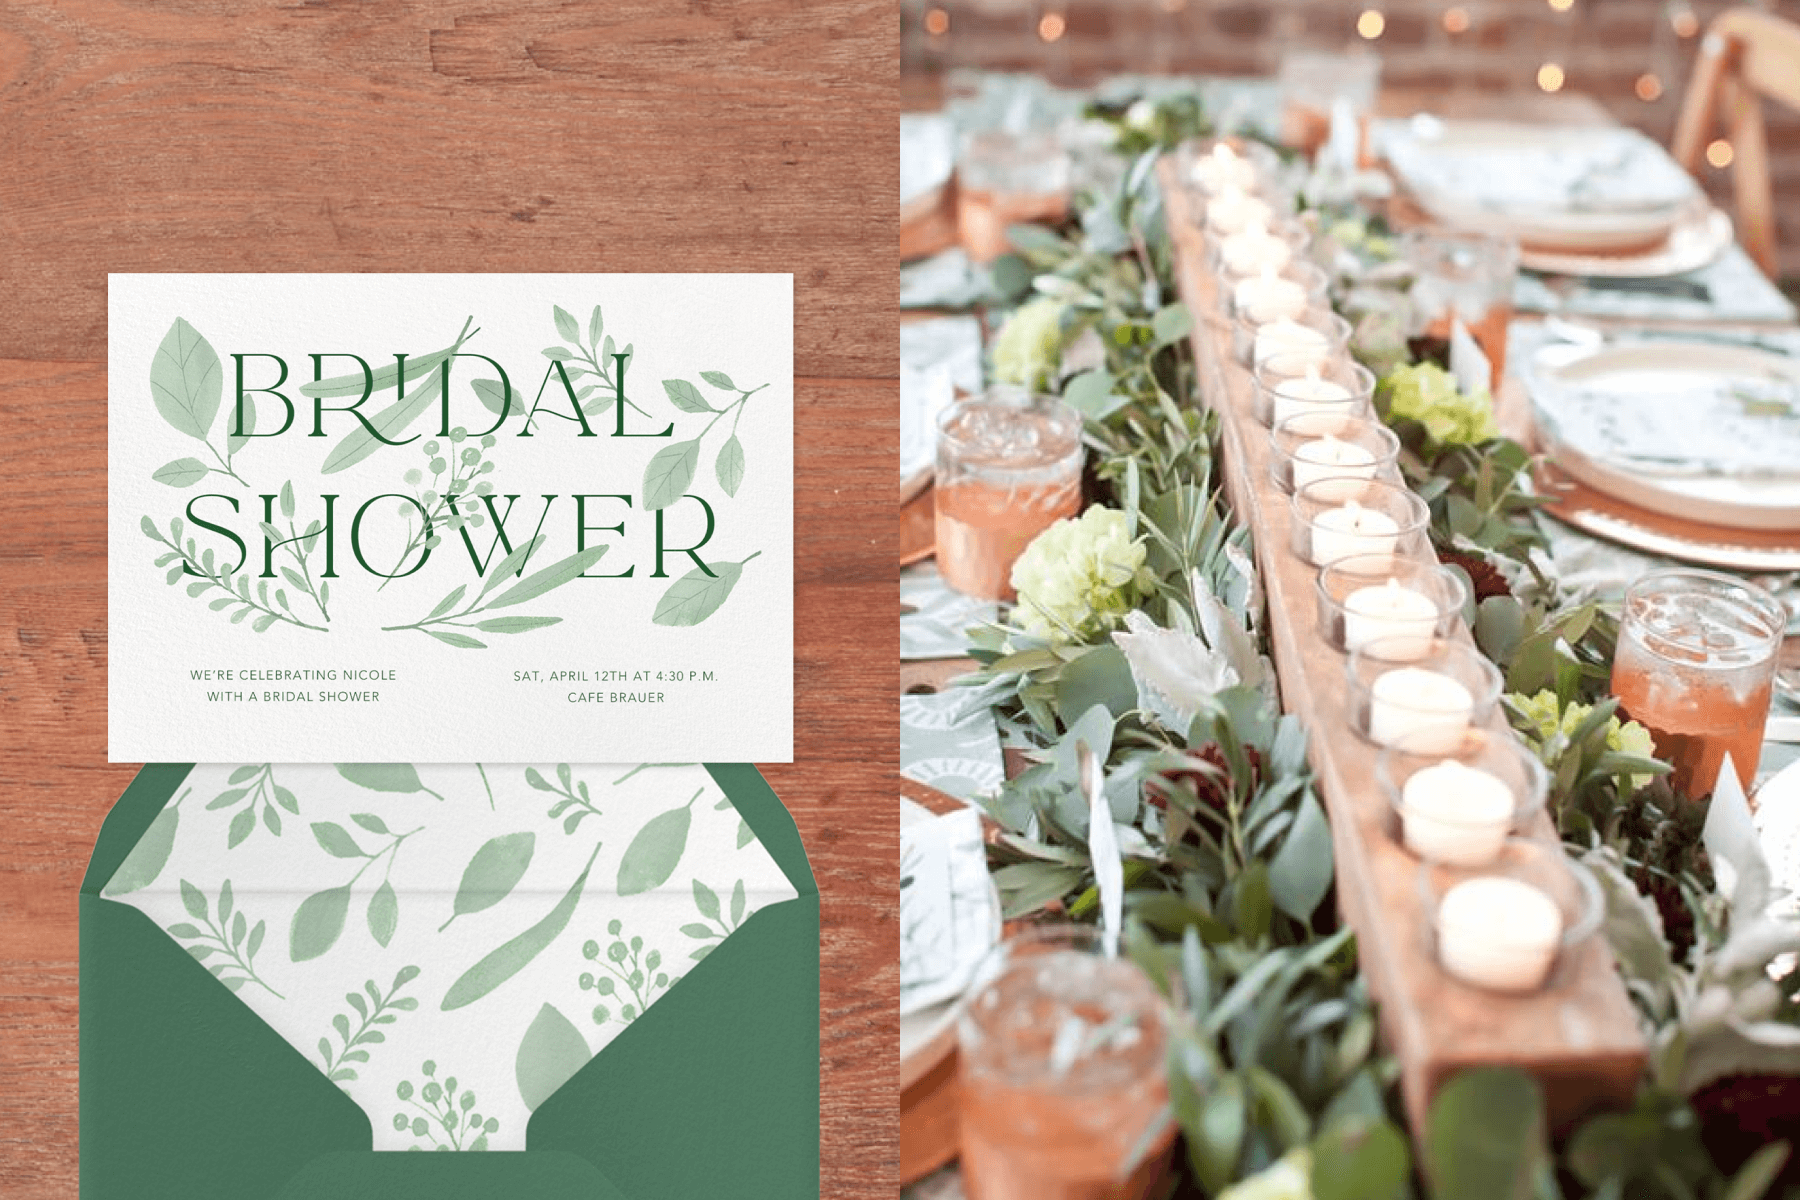 left: A horizontal bridal shower invitation with painterly light green leaves woven throughout the letters.